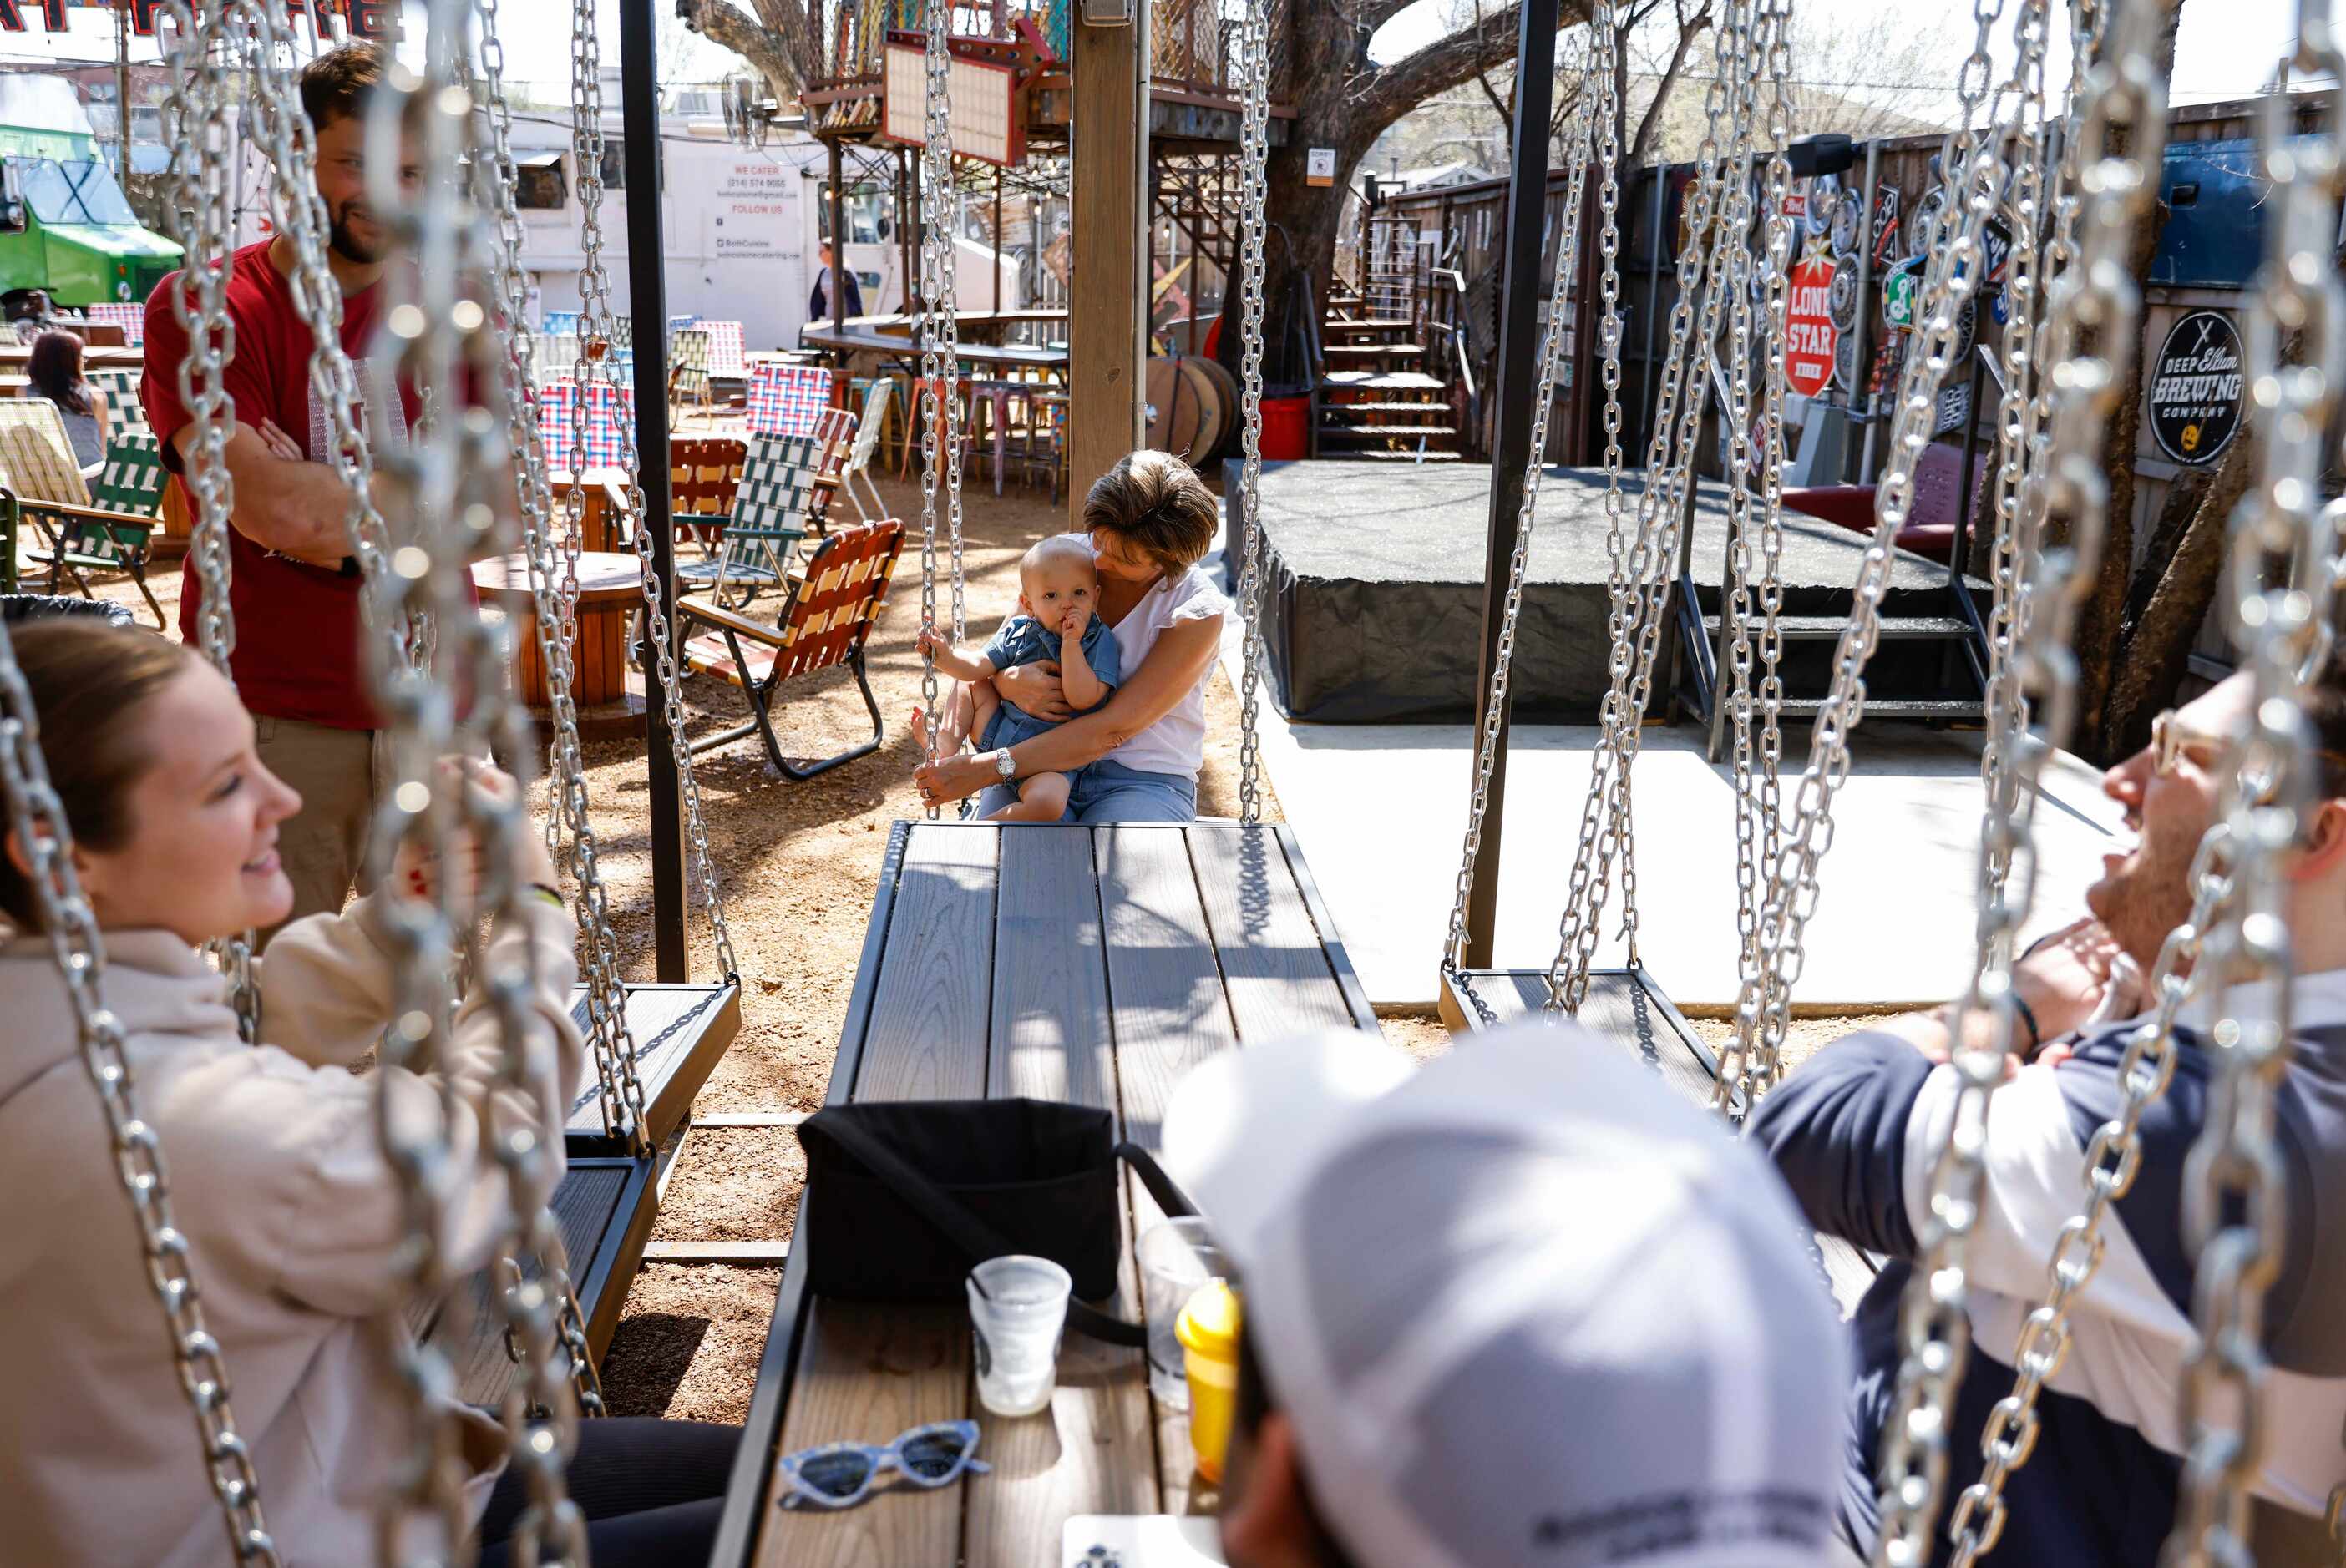 A swing set sitting area is new at Truck Yard Dallas.